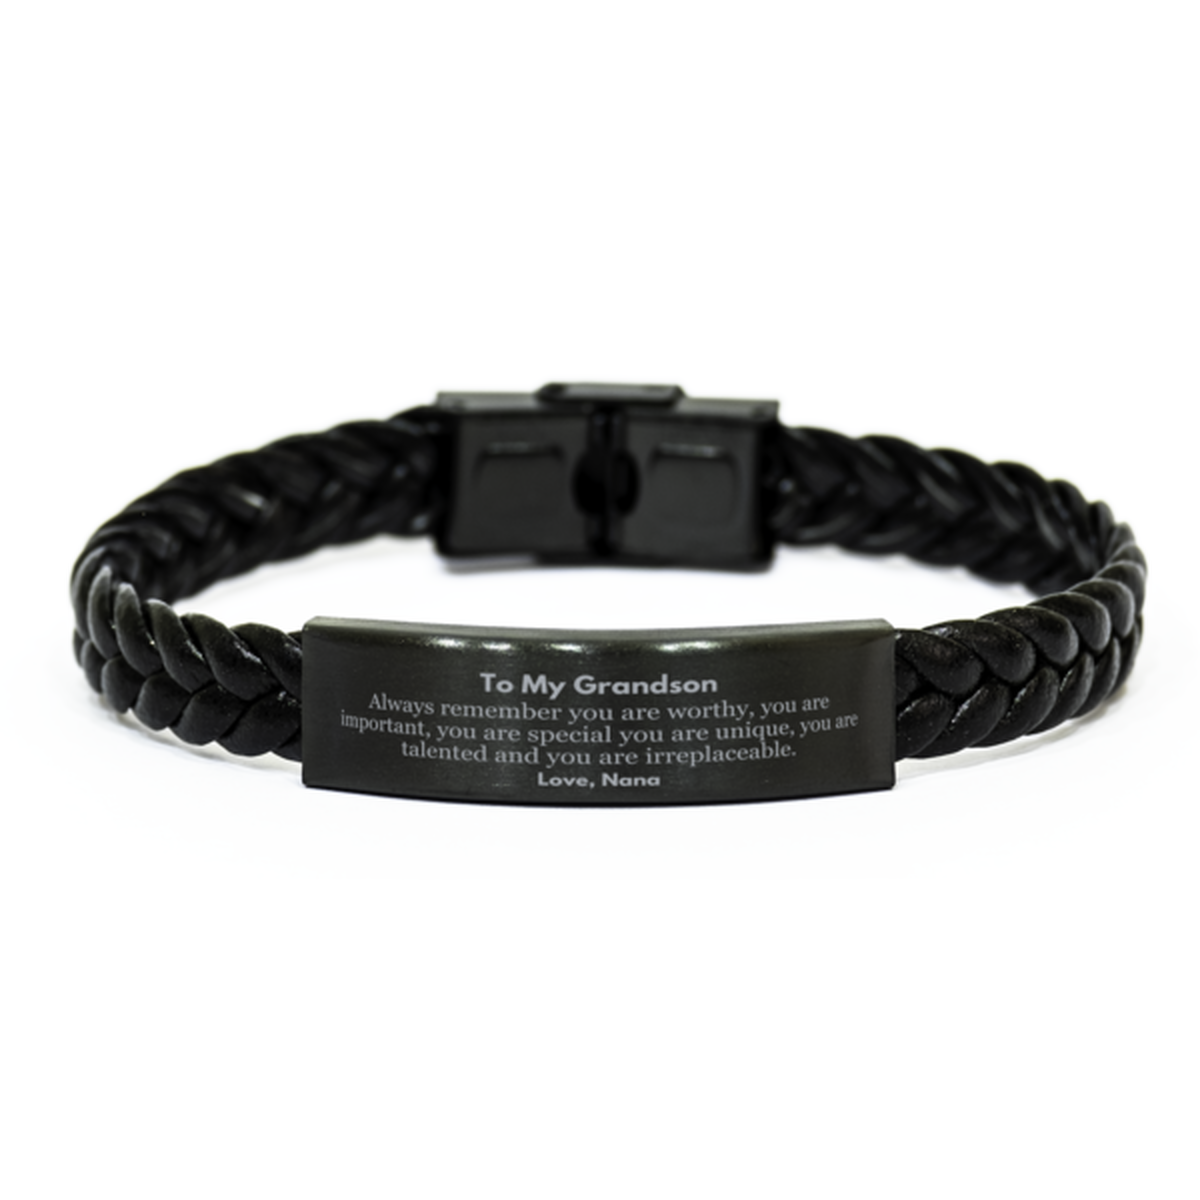 Grandson Birthday Gifts from Nana, Inspirational Braided Leather Bracelet for Grandson Christmas Graduation Gifts for Grandson Always remember you are worthy, you are important. Love, Nana